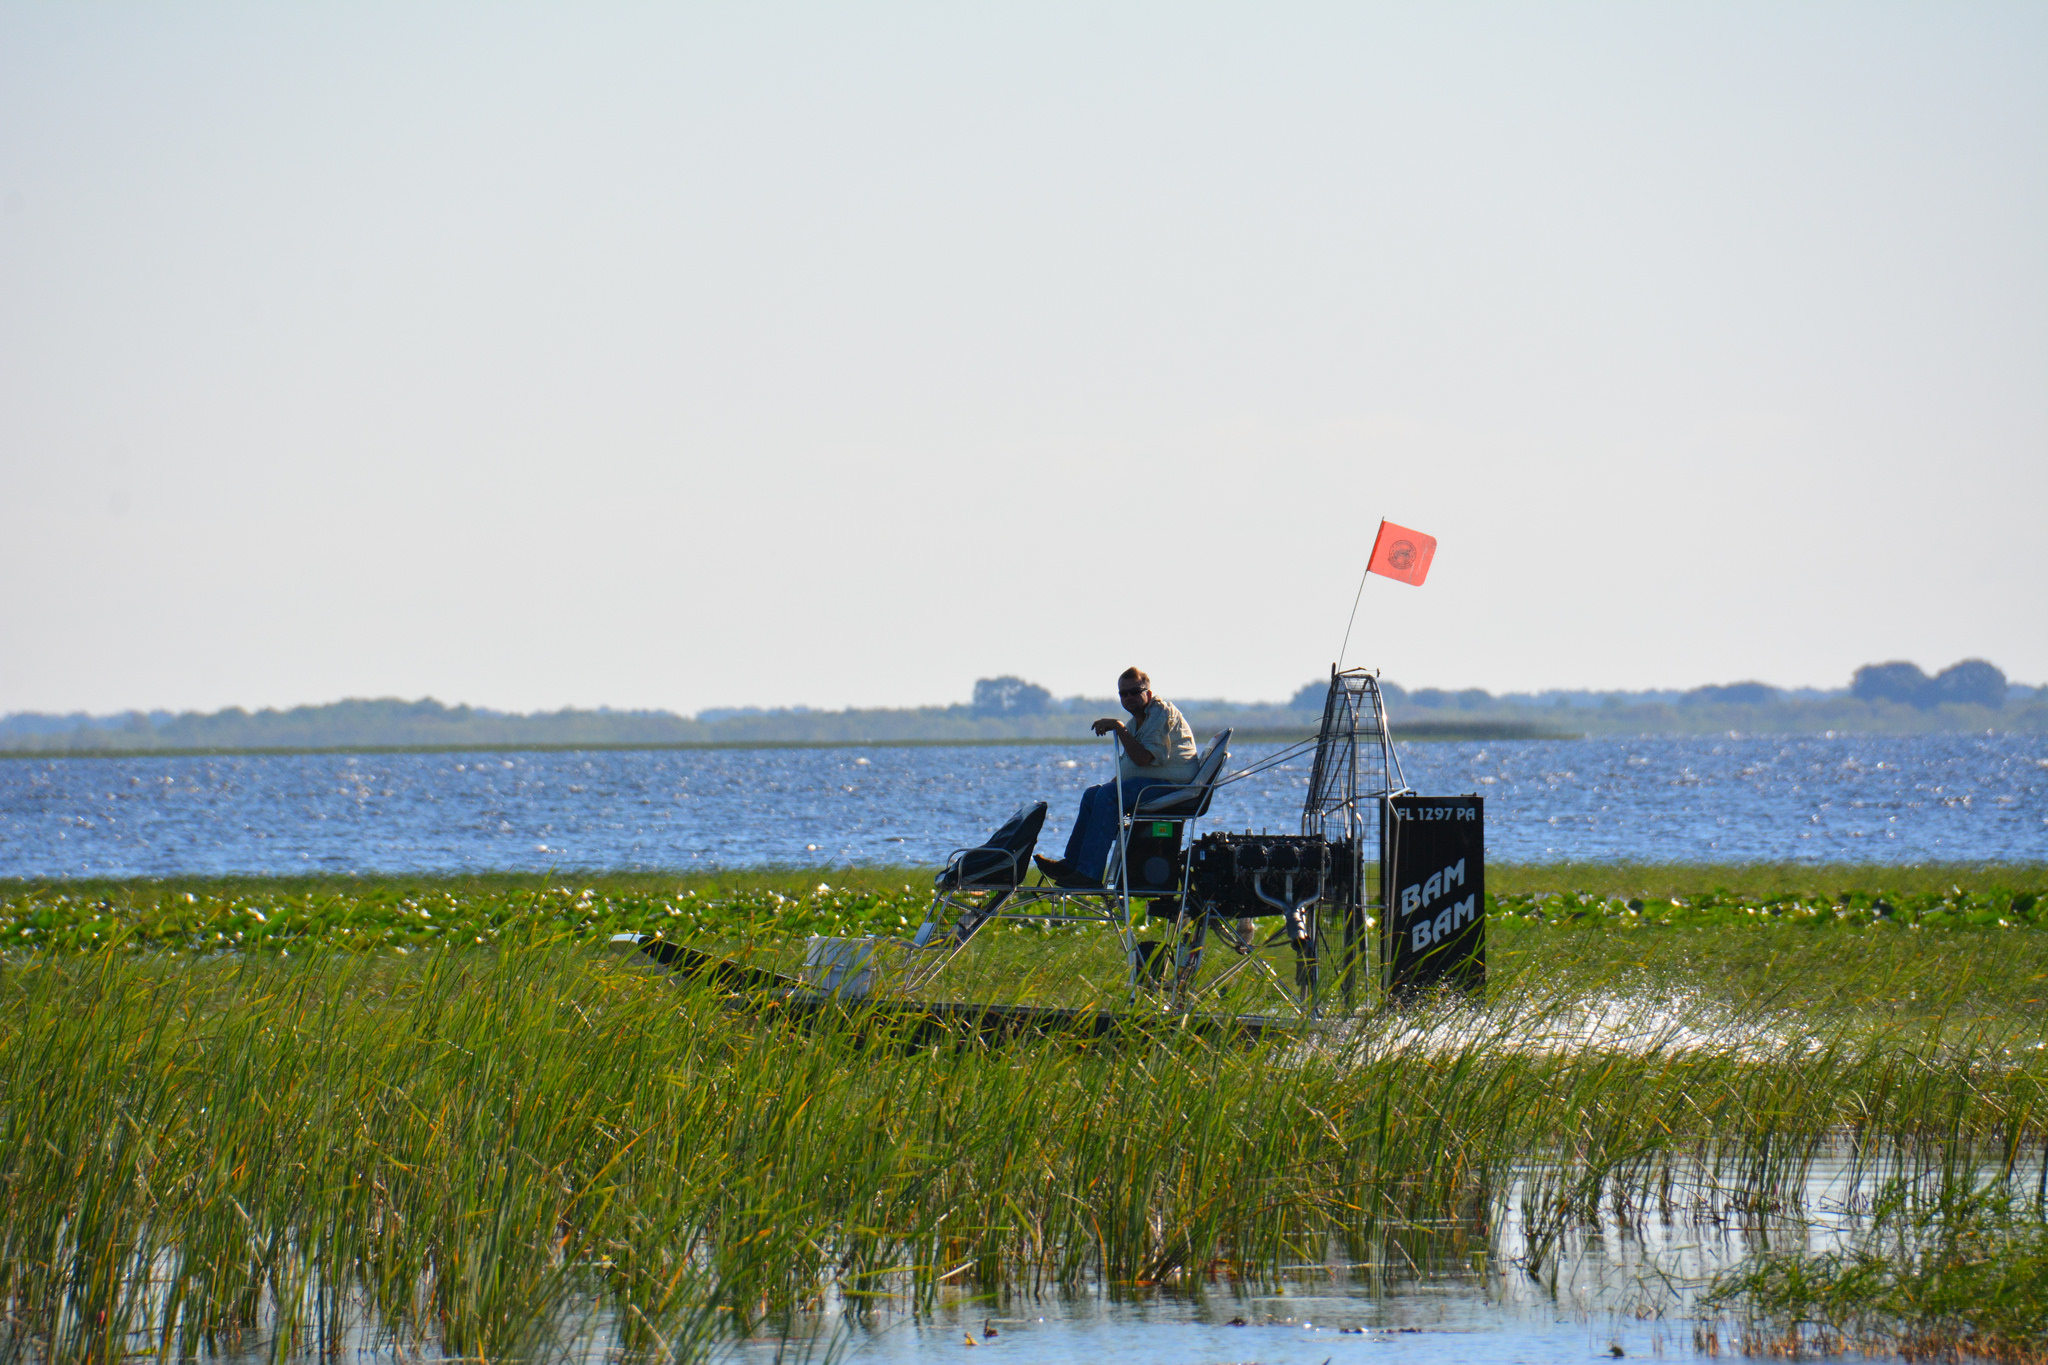 A Sportman on his airboat, proudly flying the KRVSA branded visibility flag.